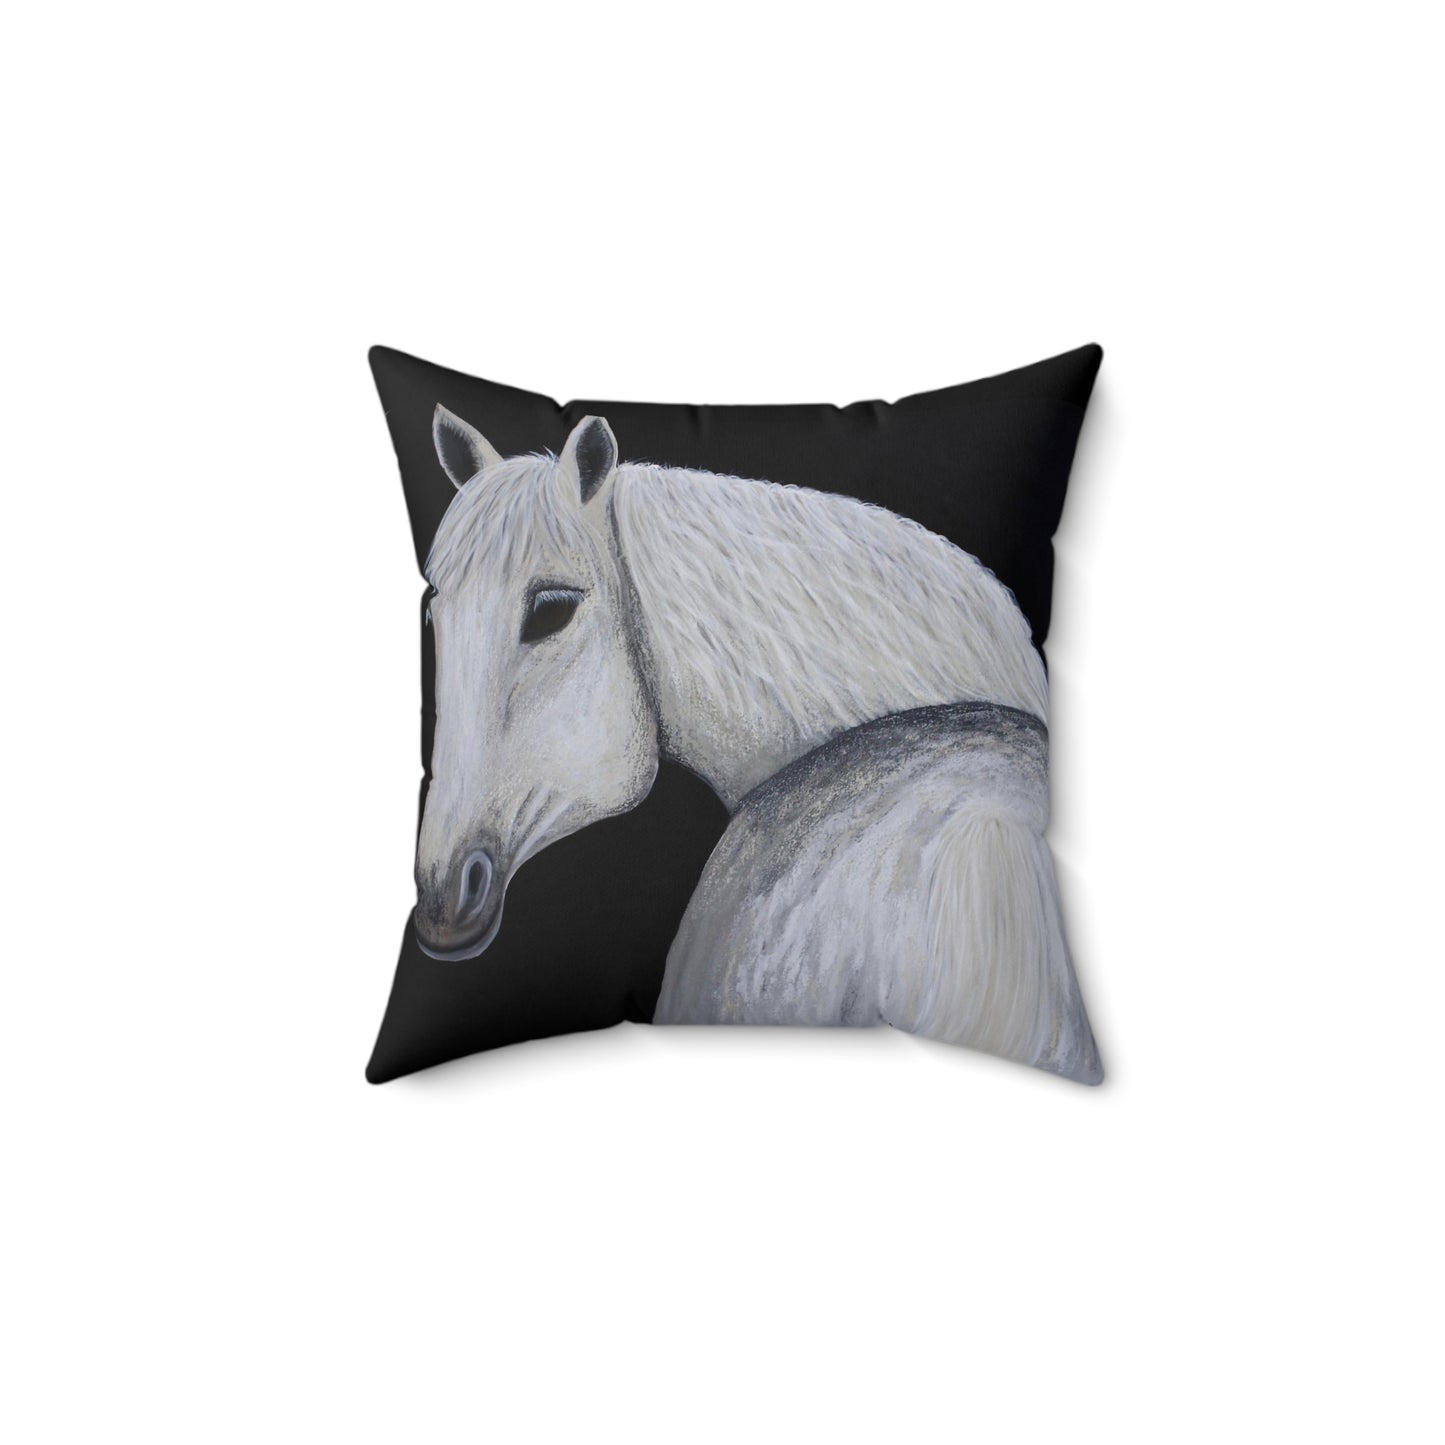 Faux Suede Square Pillow - Ghost Toss Pillow - Horse Throw Pillow